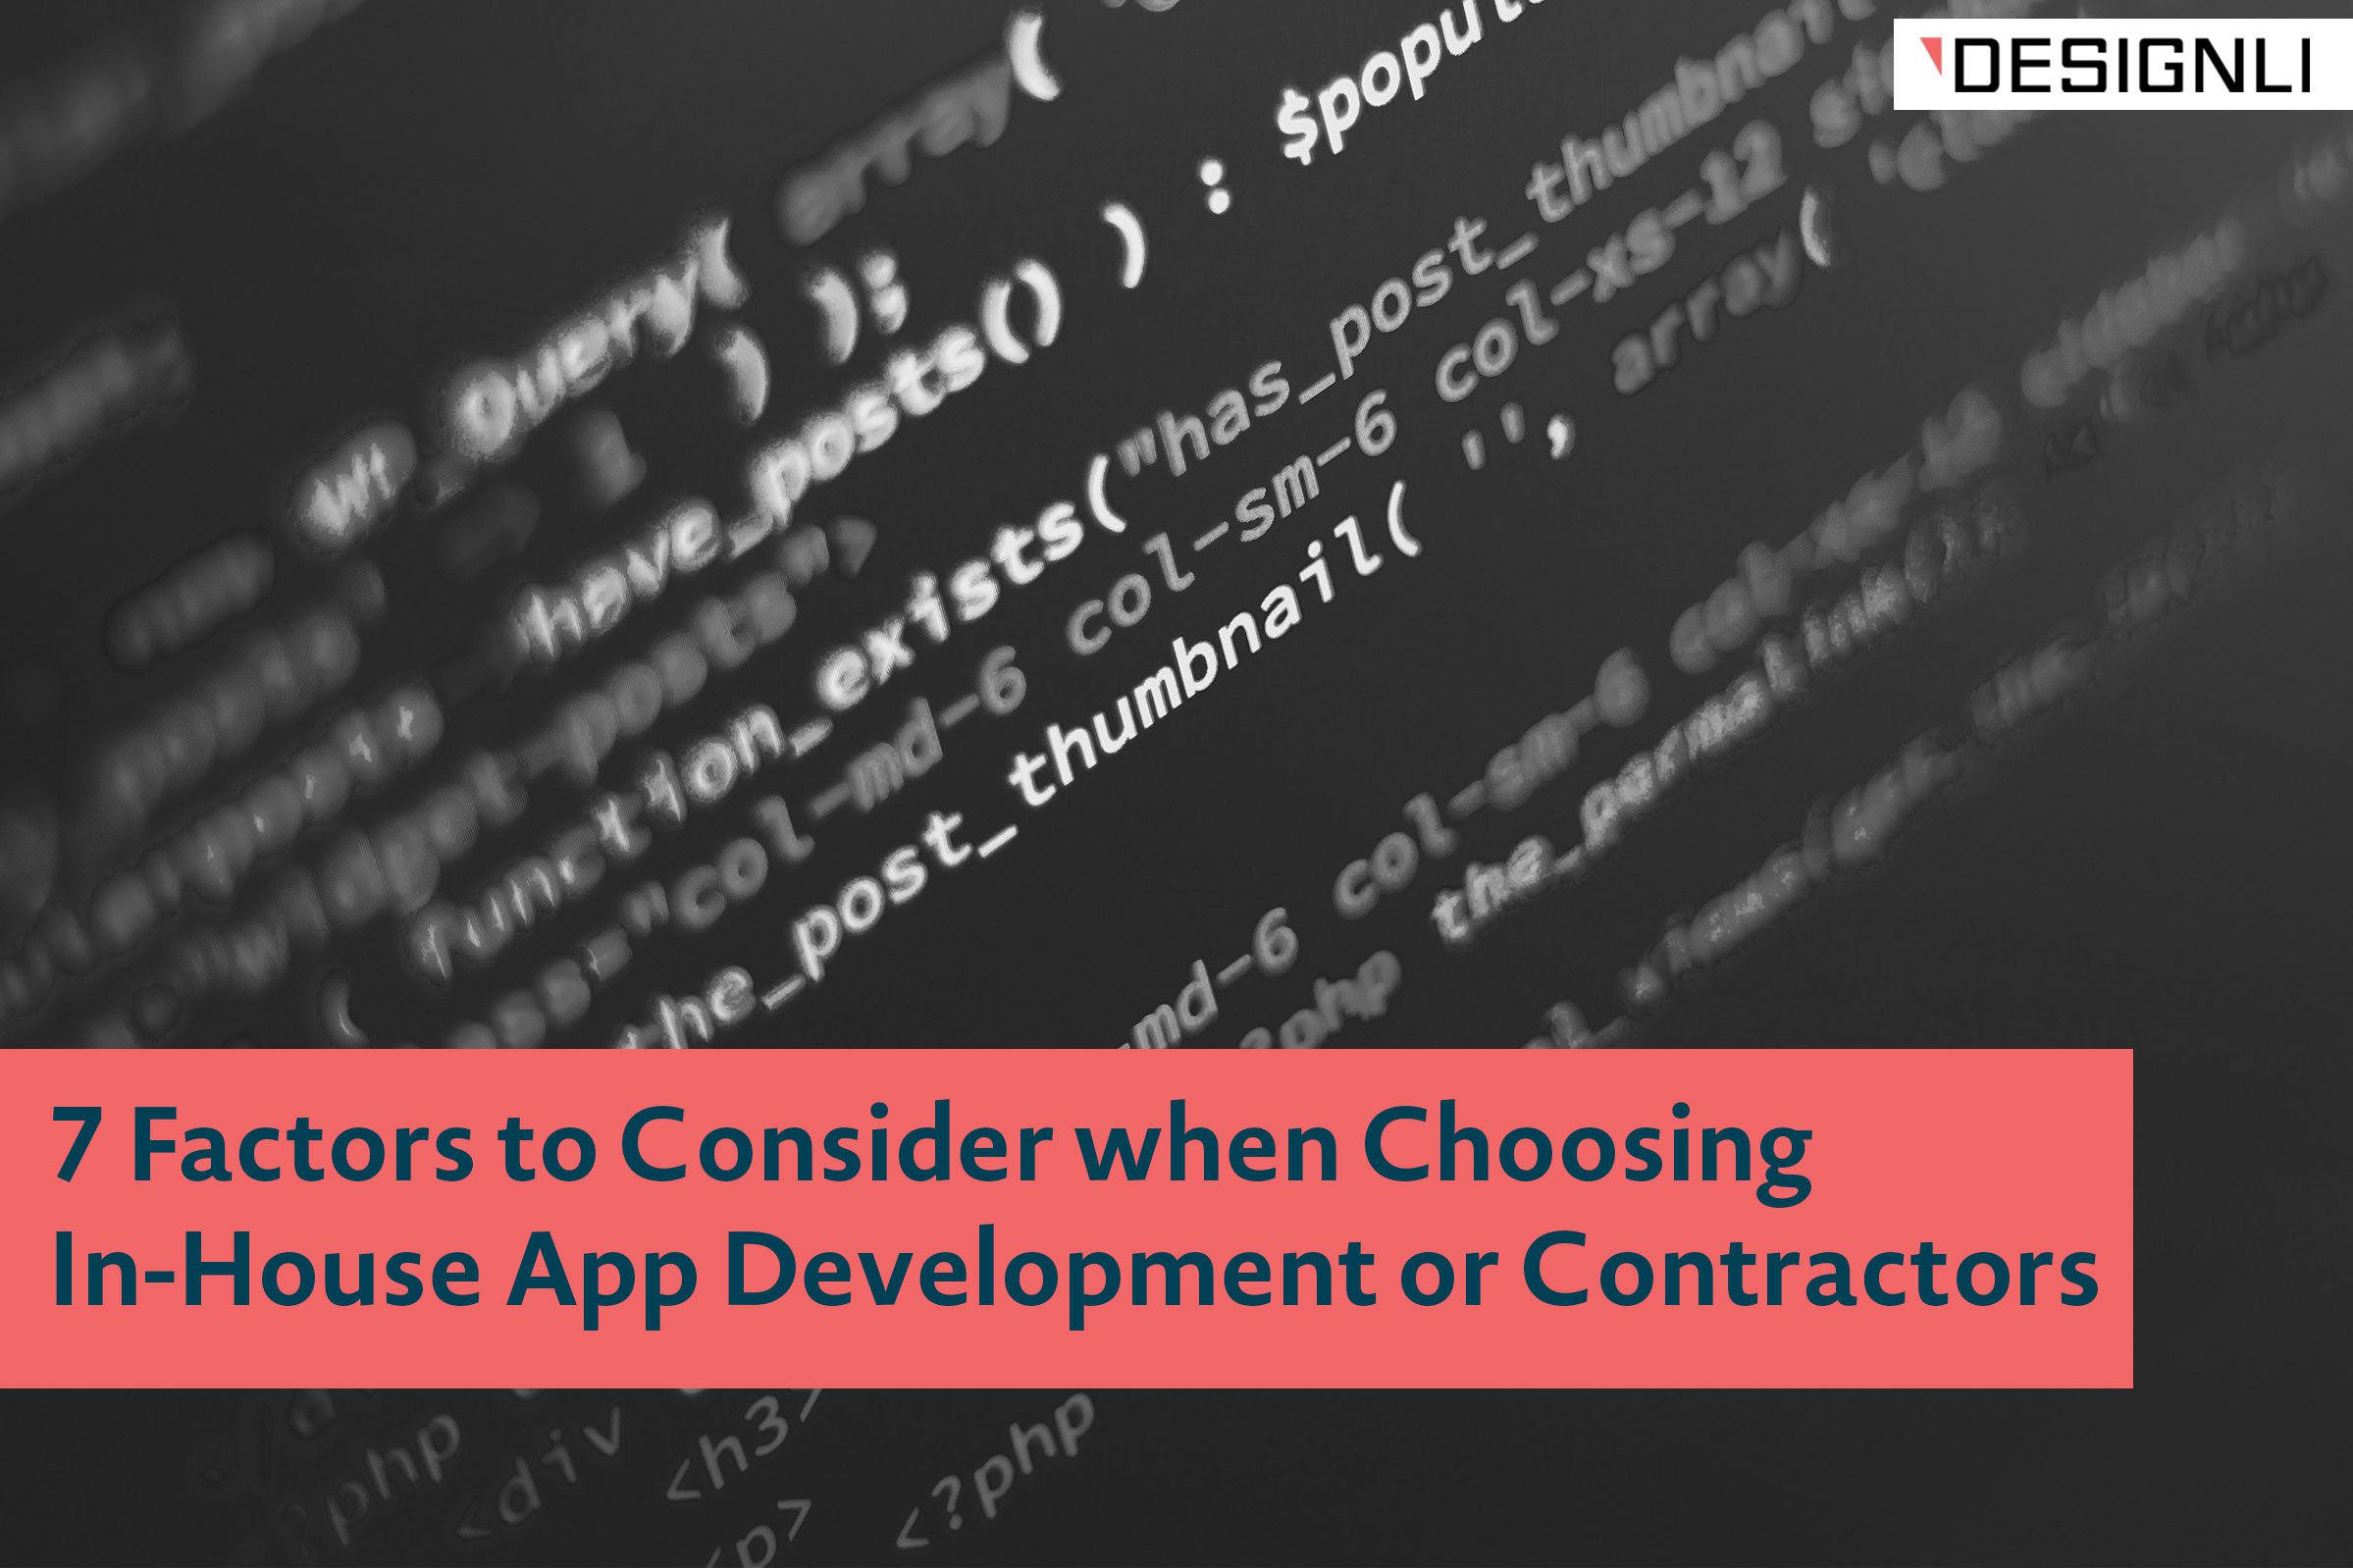 7 Considerations When Choosing In-House App Development or Contractors